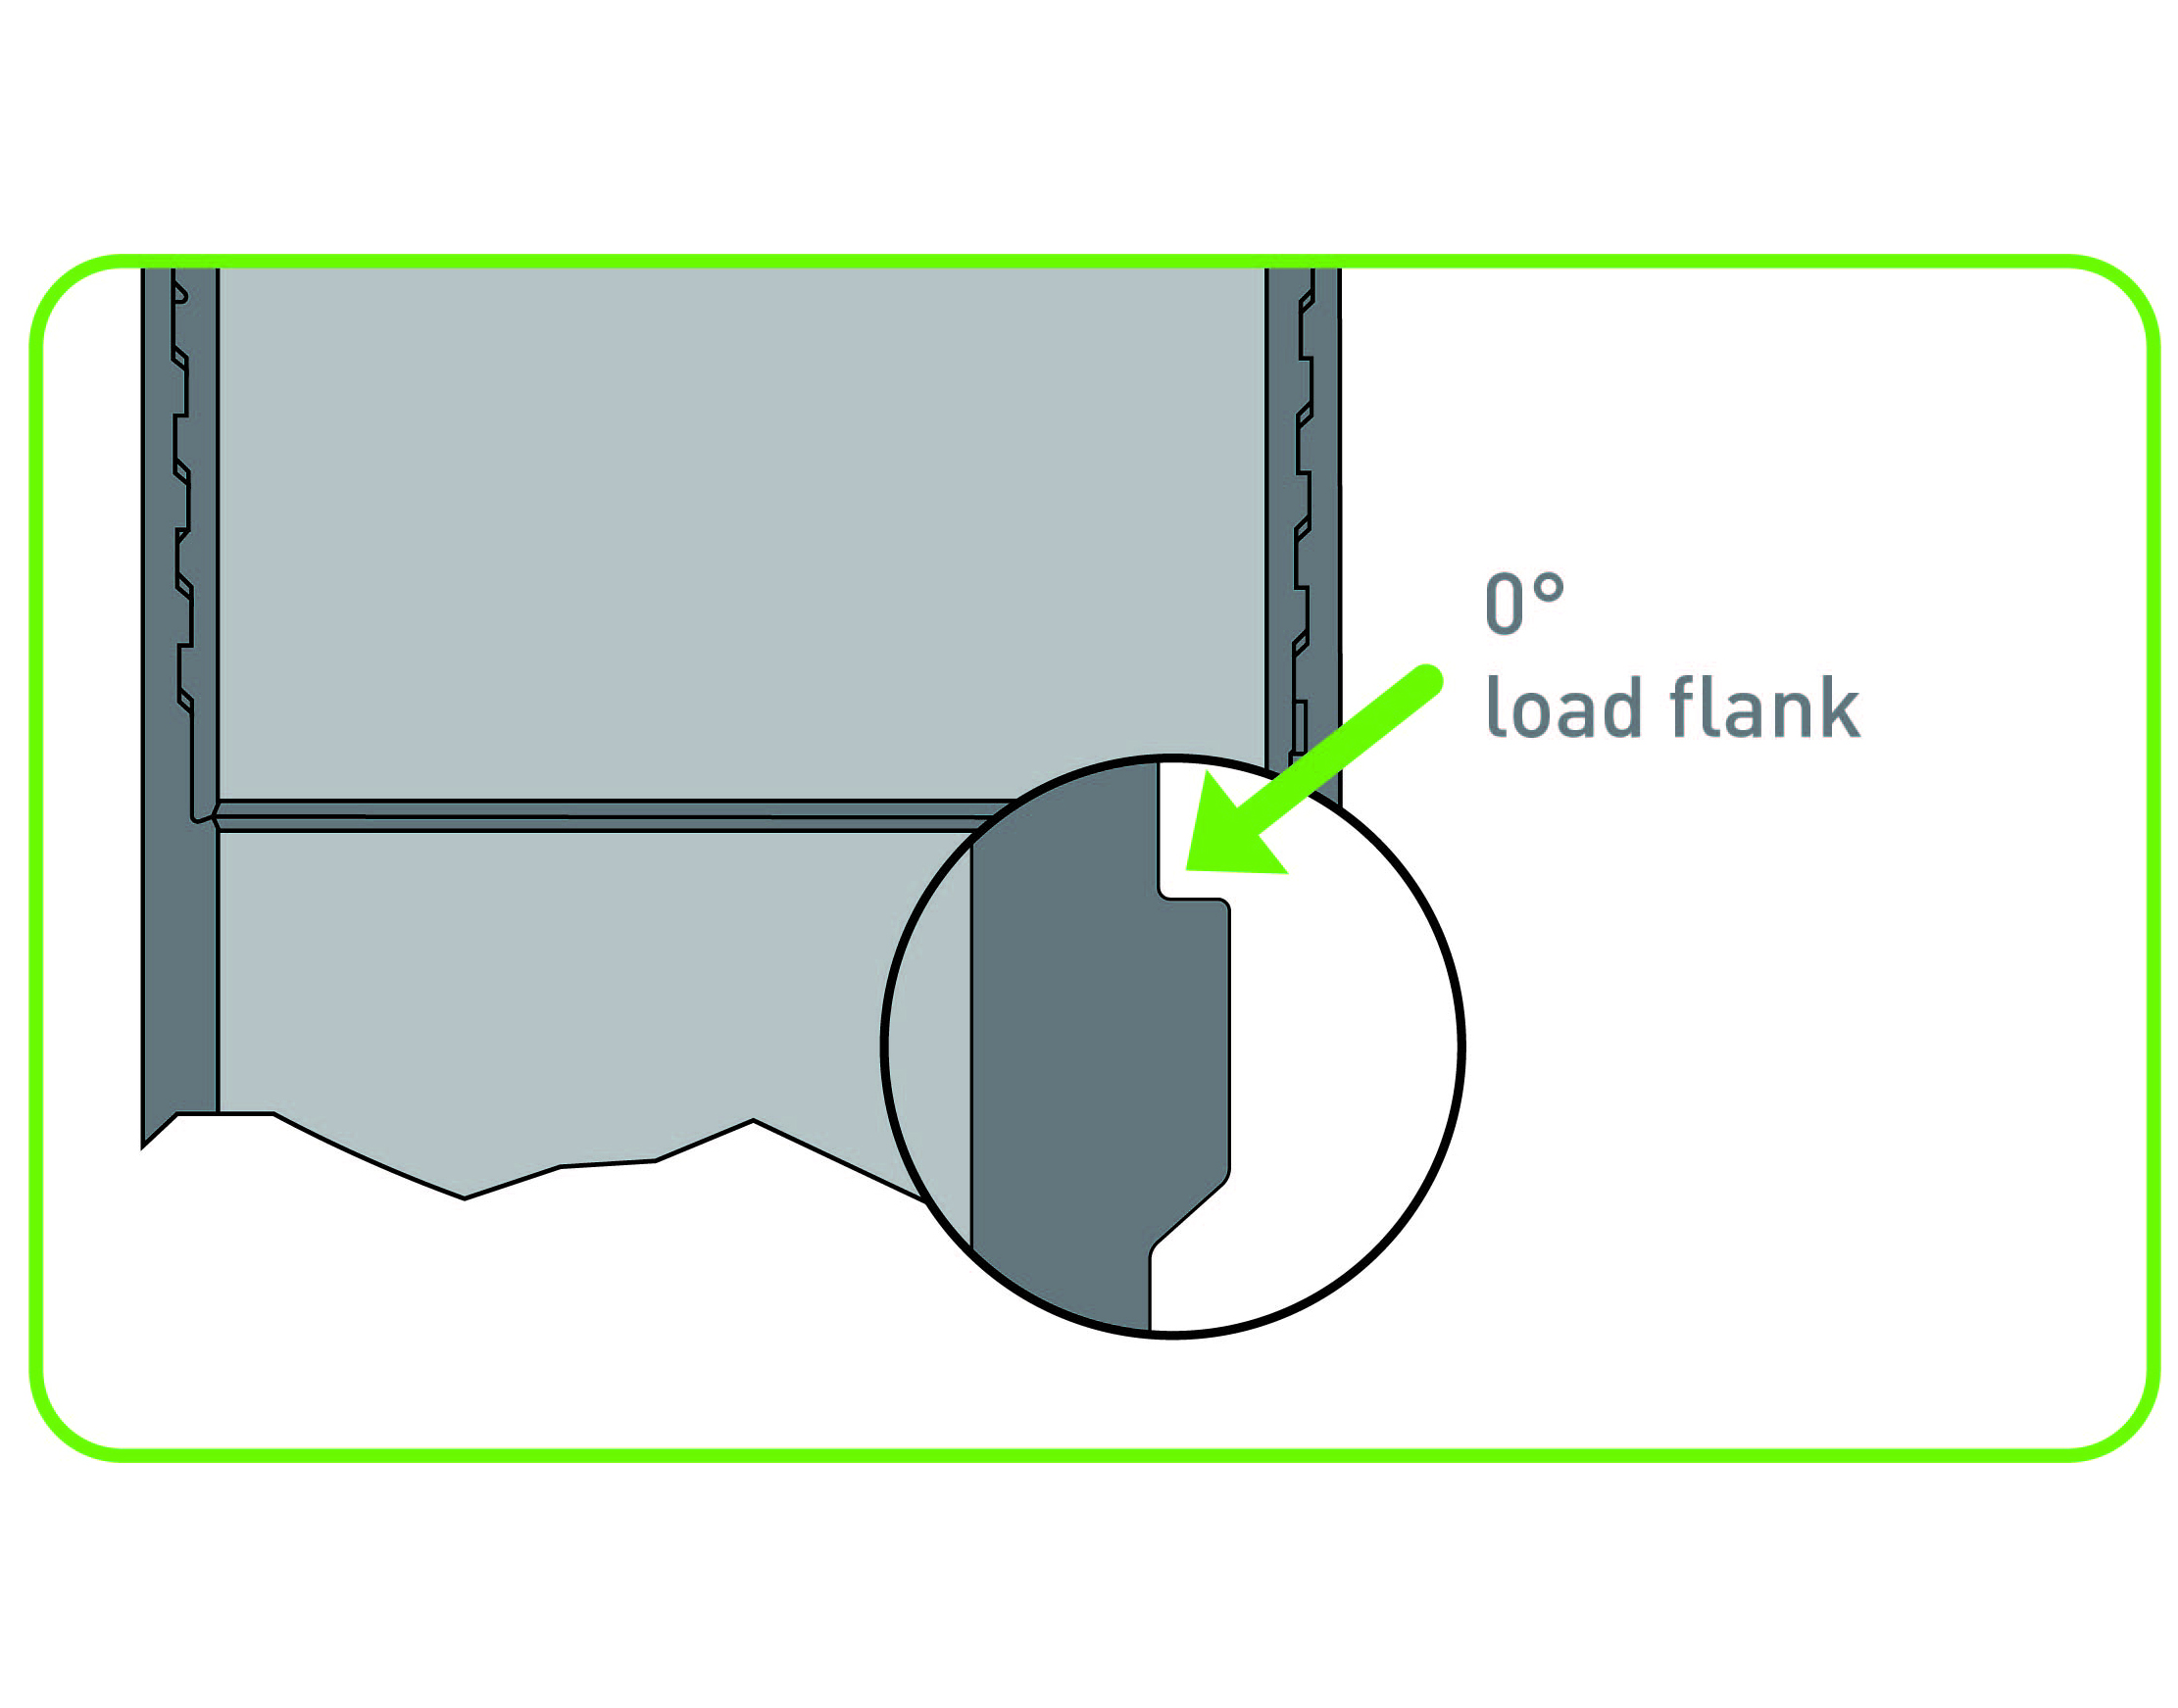 Diagram showing 0 degree load flank.